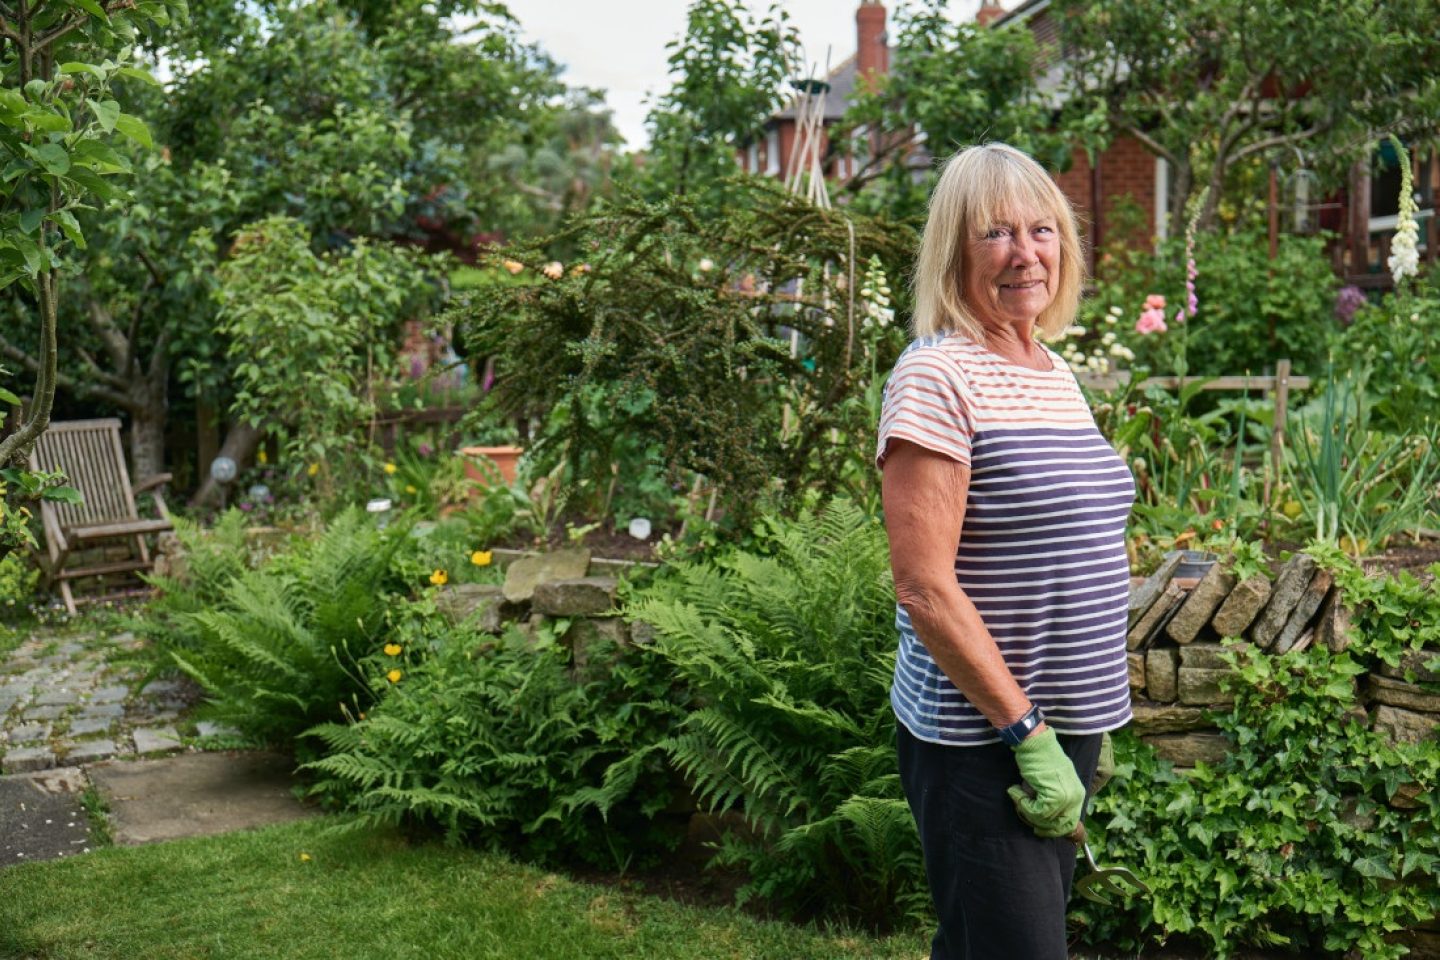 A person standing in a garden